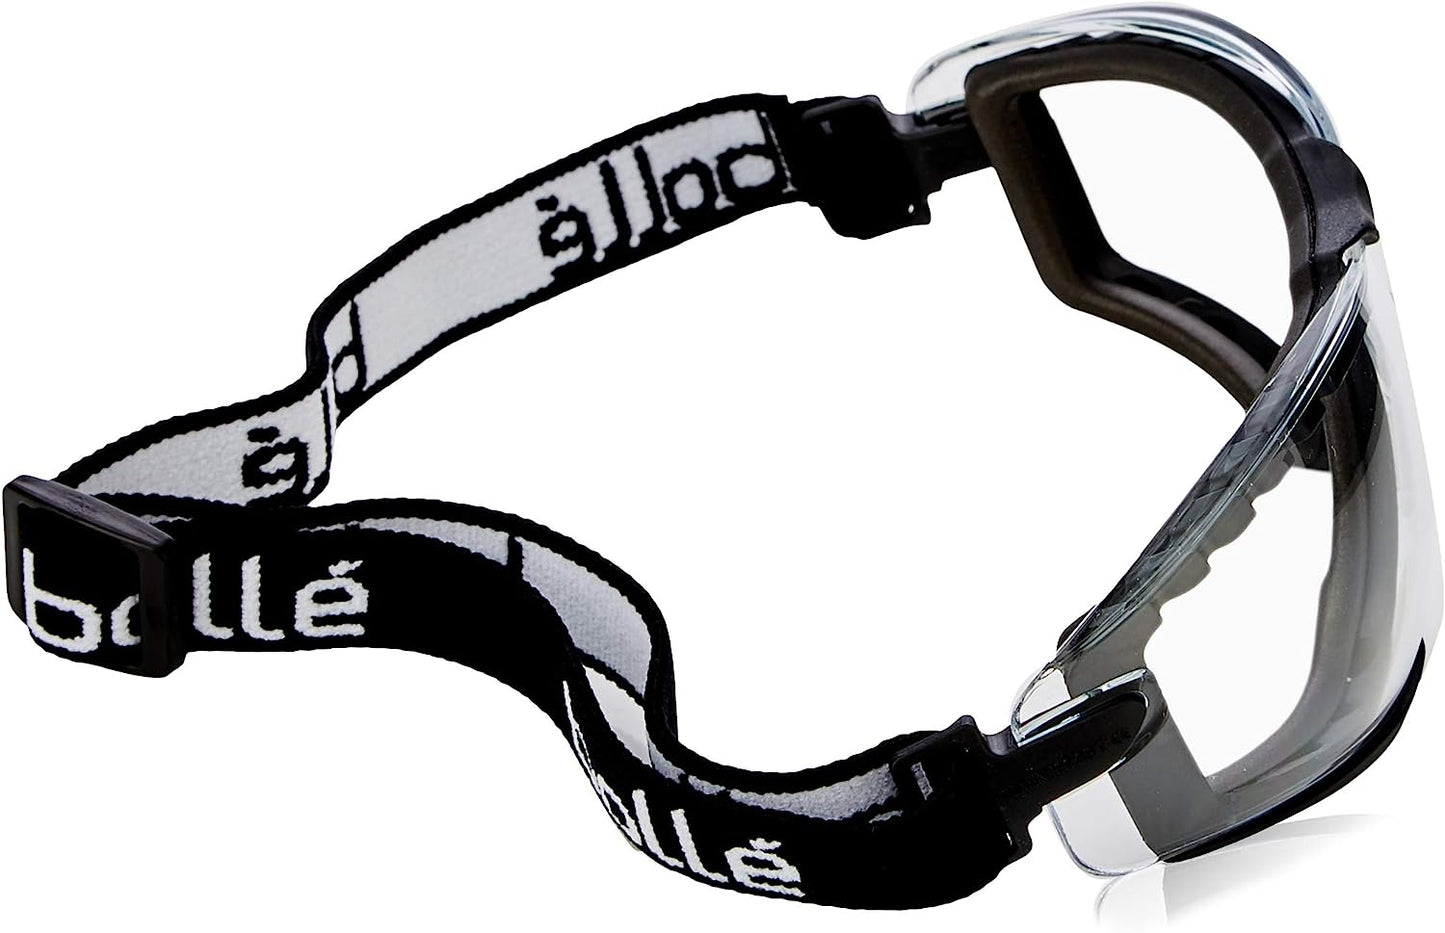 Bolle Safety Cobra Clear Goggles